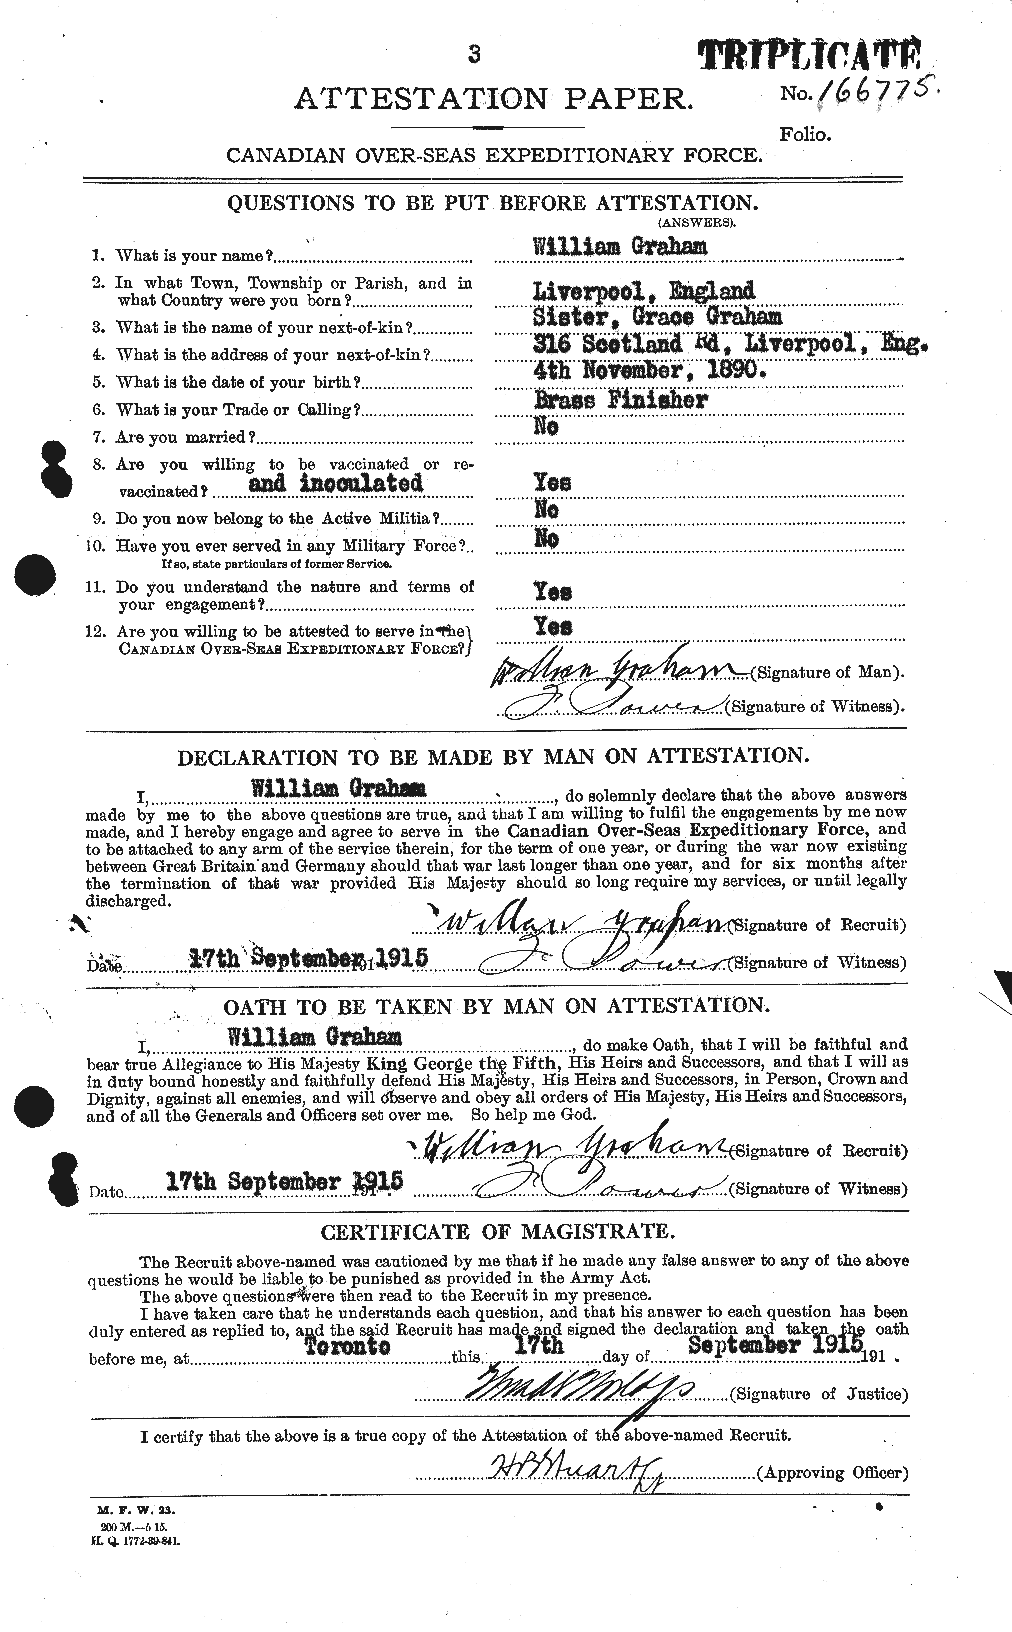 Personnel Records of the First World War - CEF 362693a